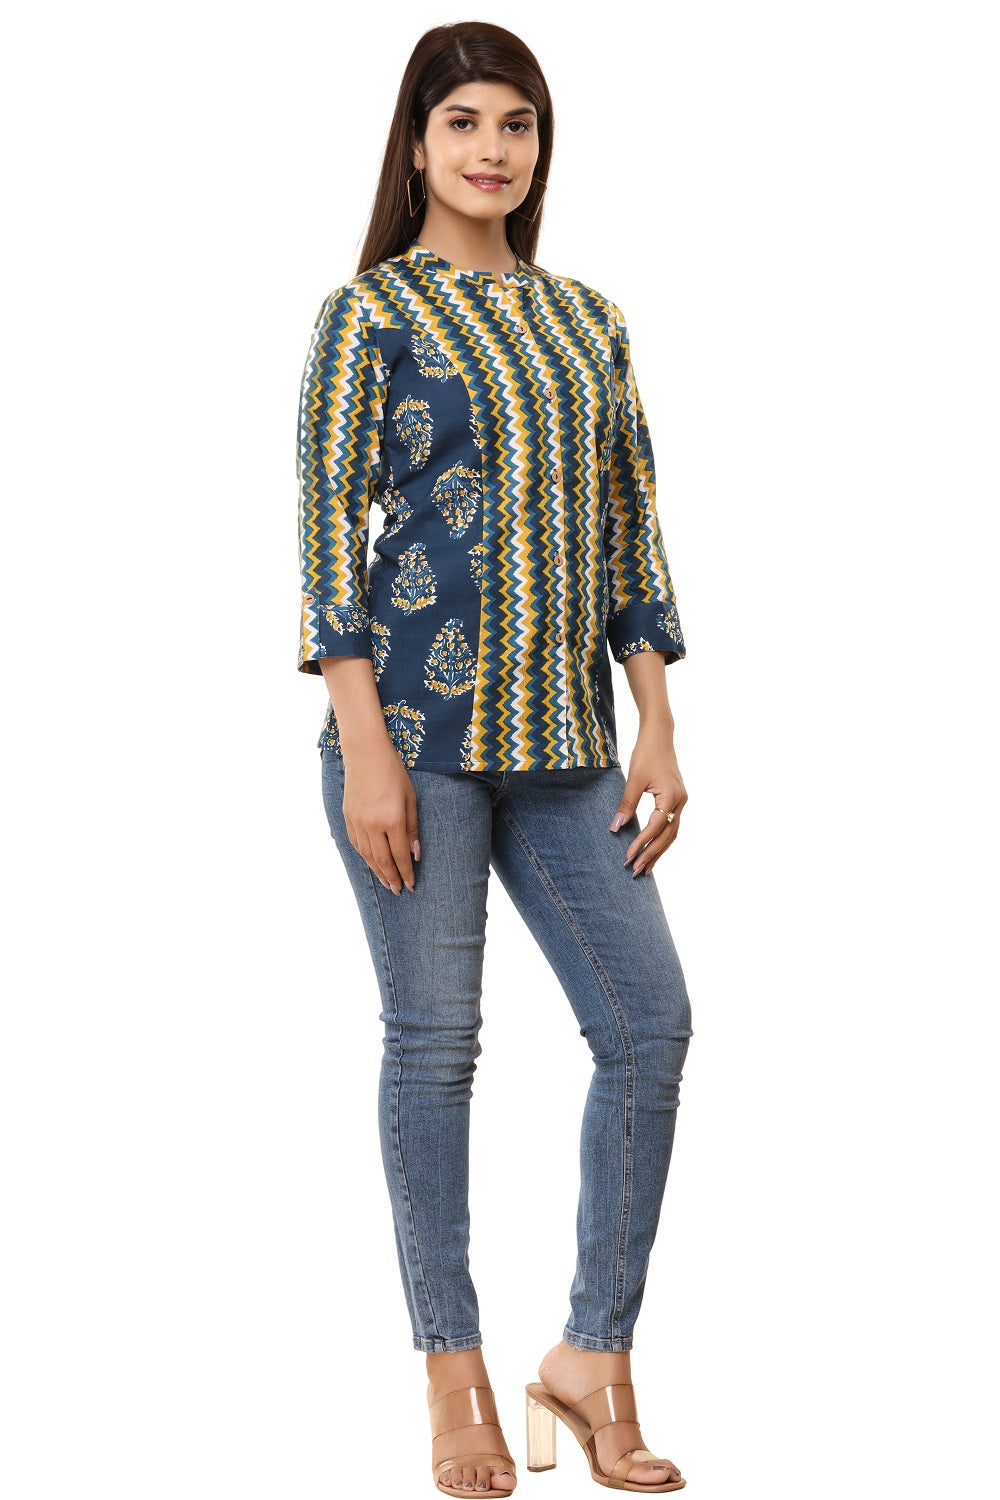 Indian Multicolor zigzag printed Casual top for women